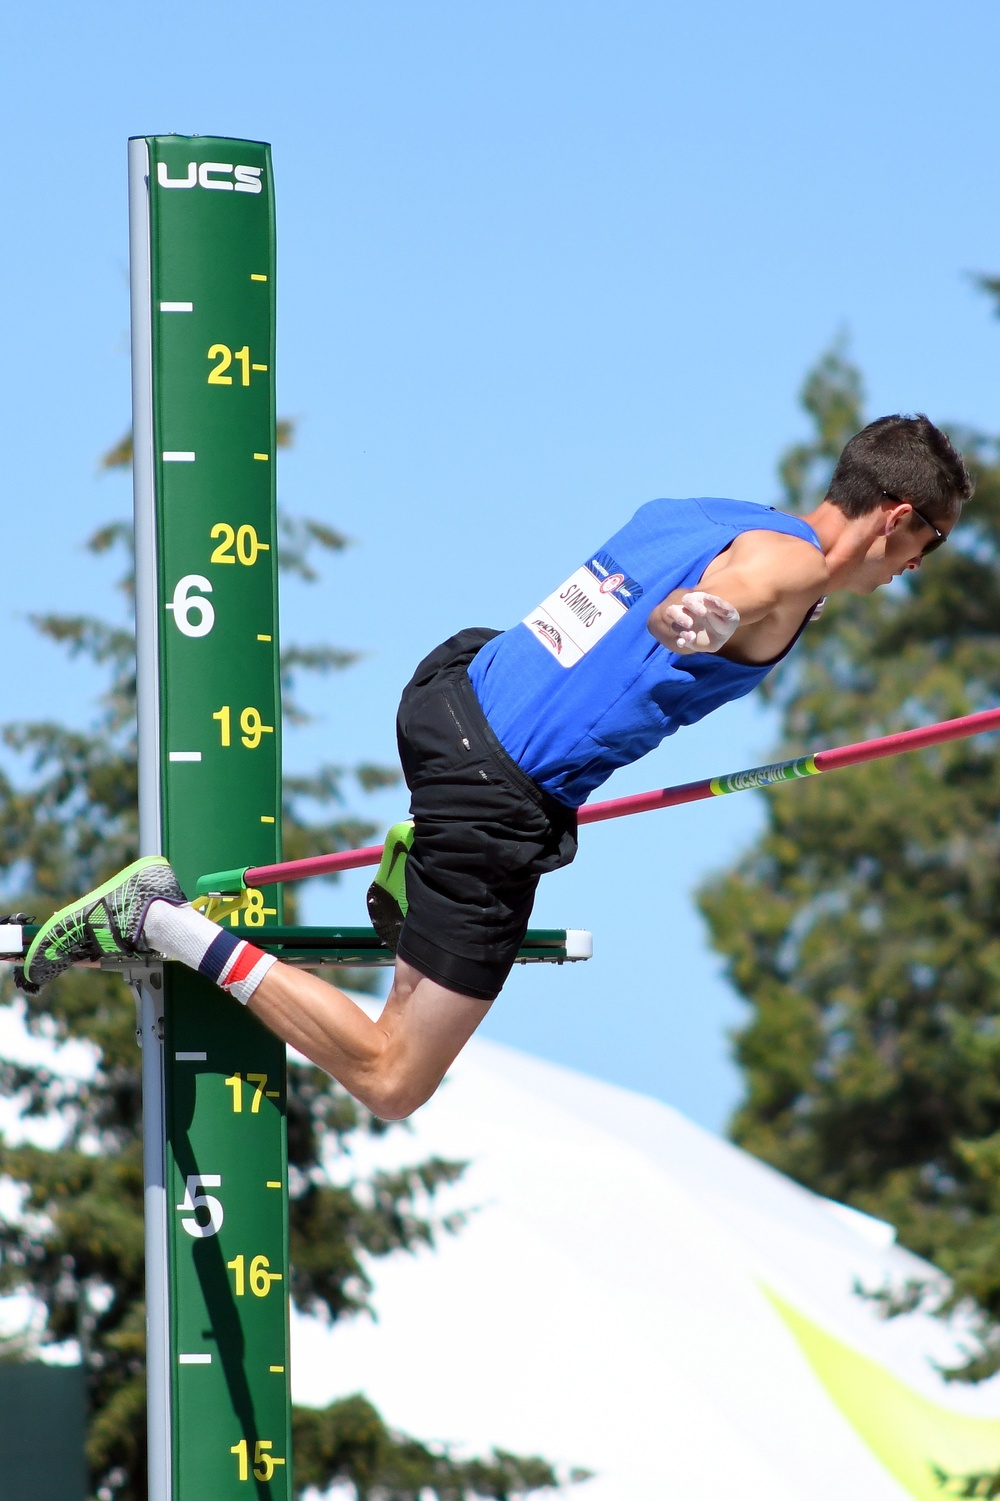 U.S. Olympic Team Trials - Track and Field - men's pole vault preliminaries July2, 2016